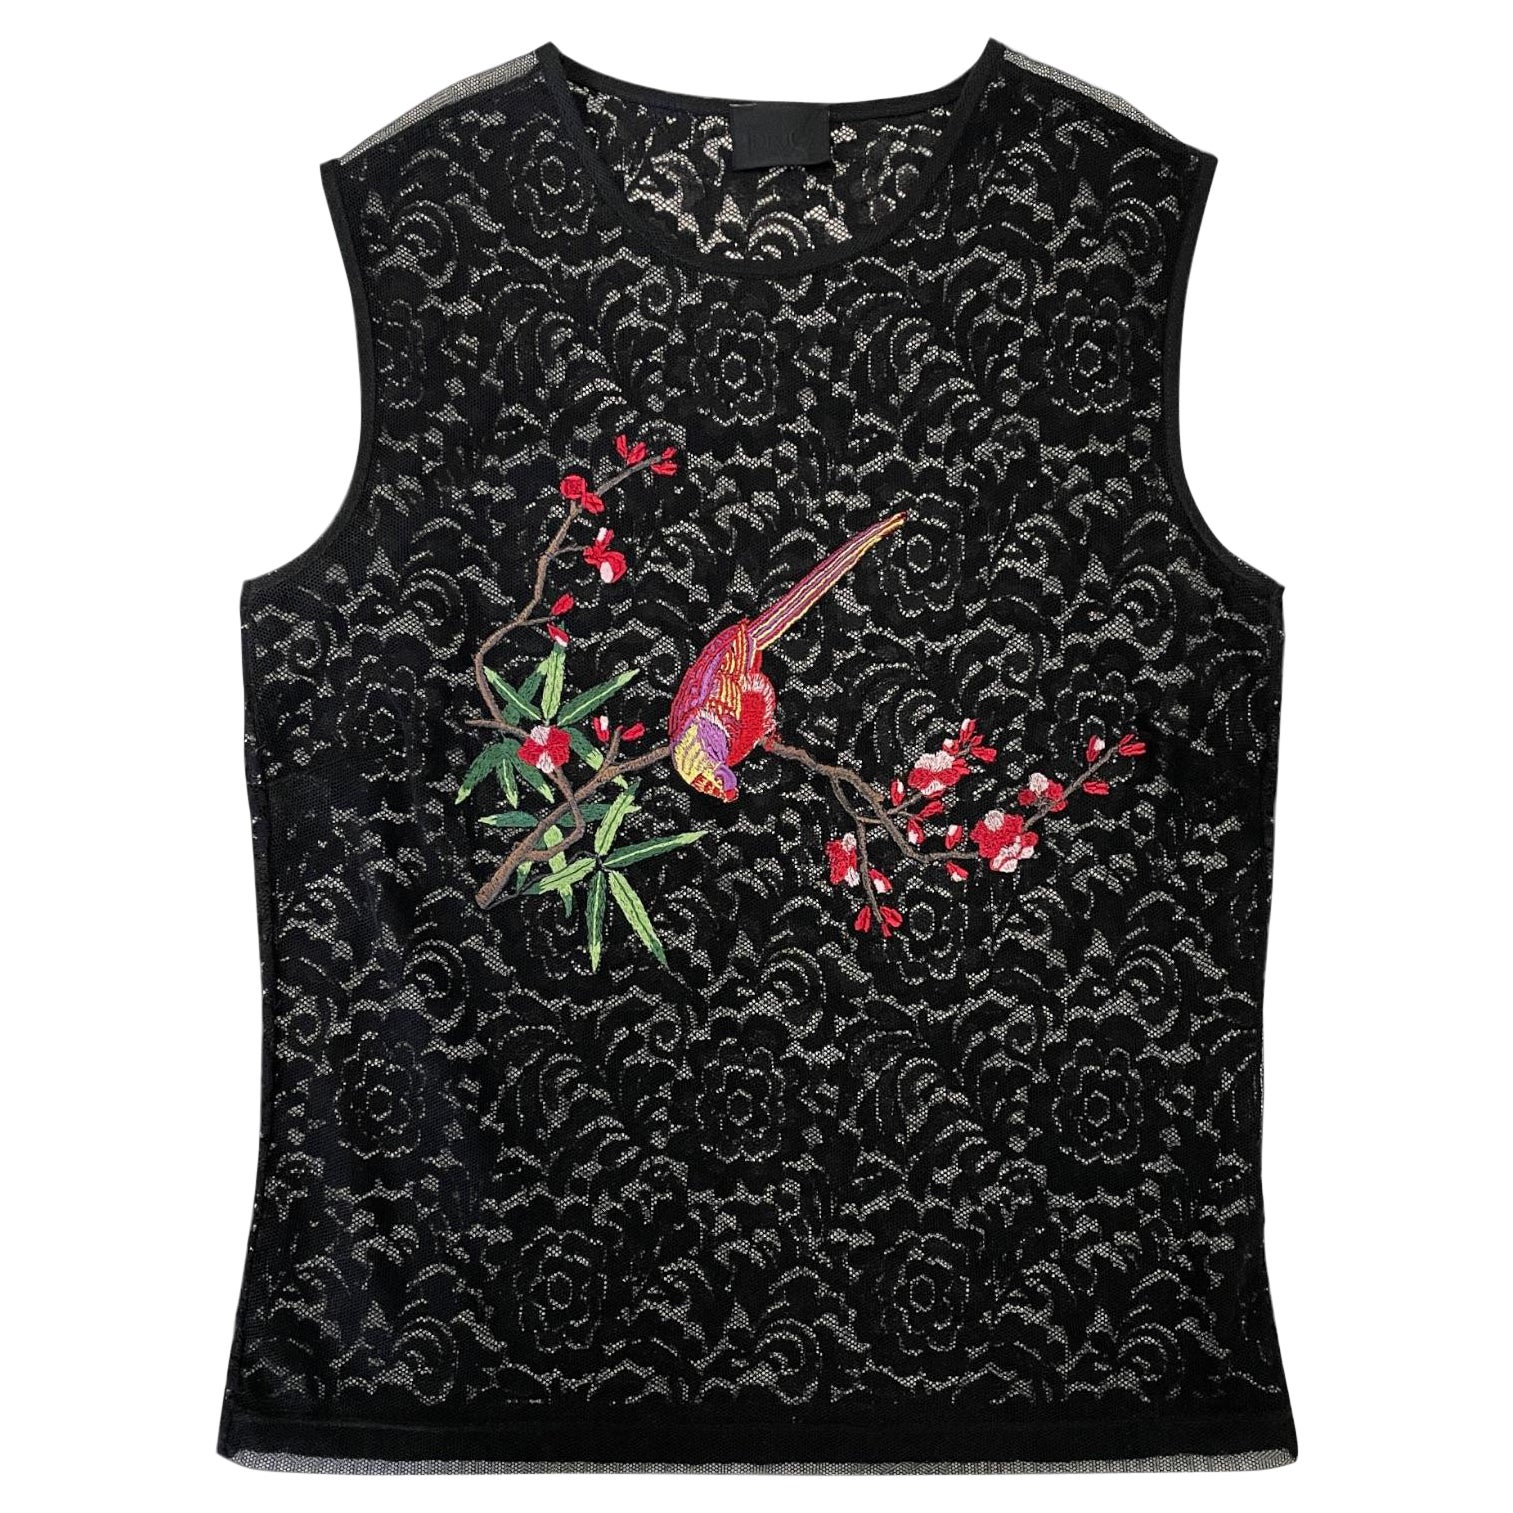 Dolce e Gabbana - D&G "Embroided Nature" Top S/S 1999 For Sale